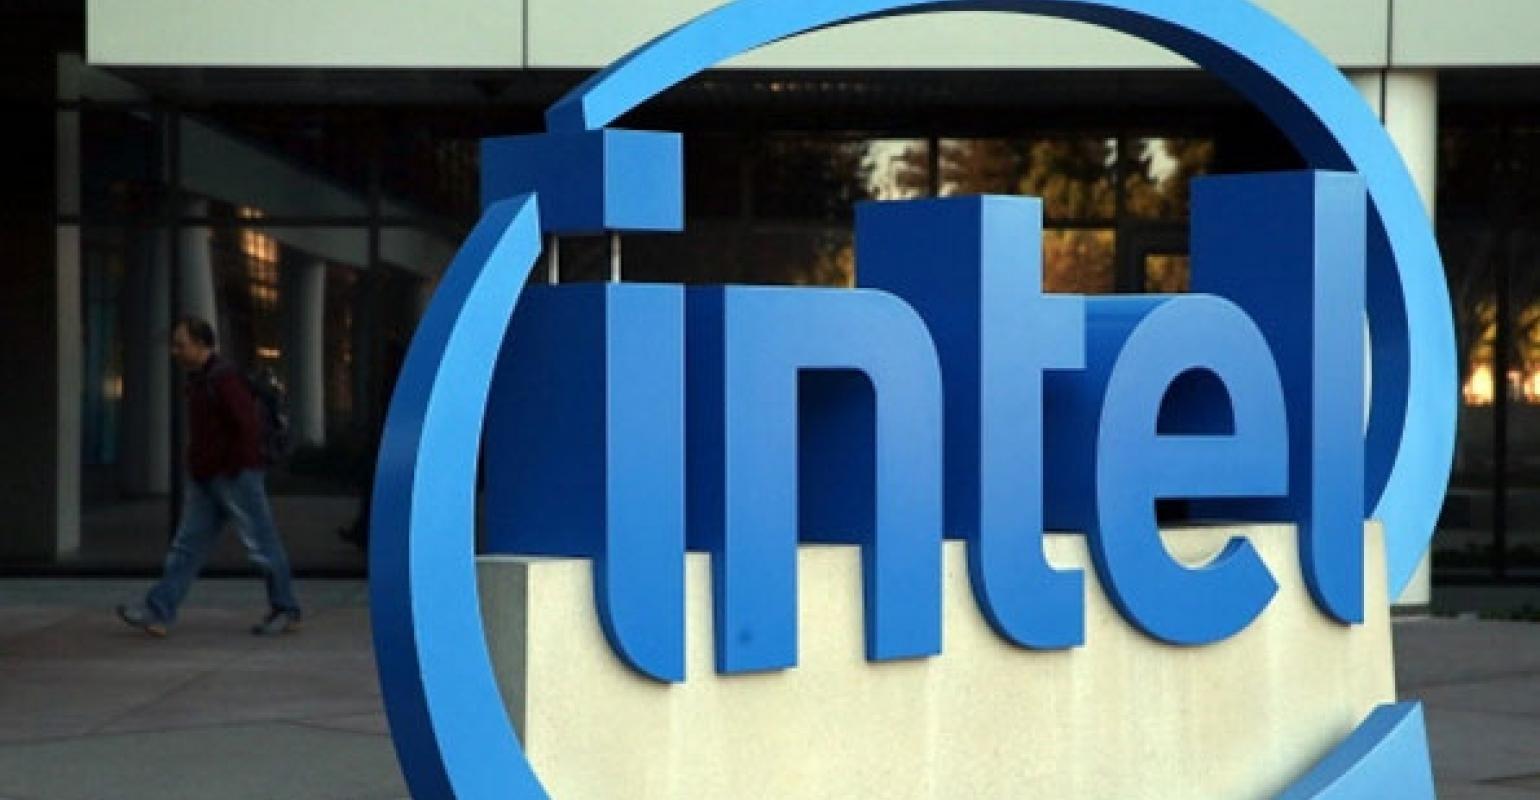 Intel Company Logo - Intel Executive Search Continues for CEO | Strategy | IndustryWeek